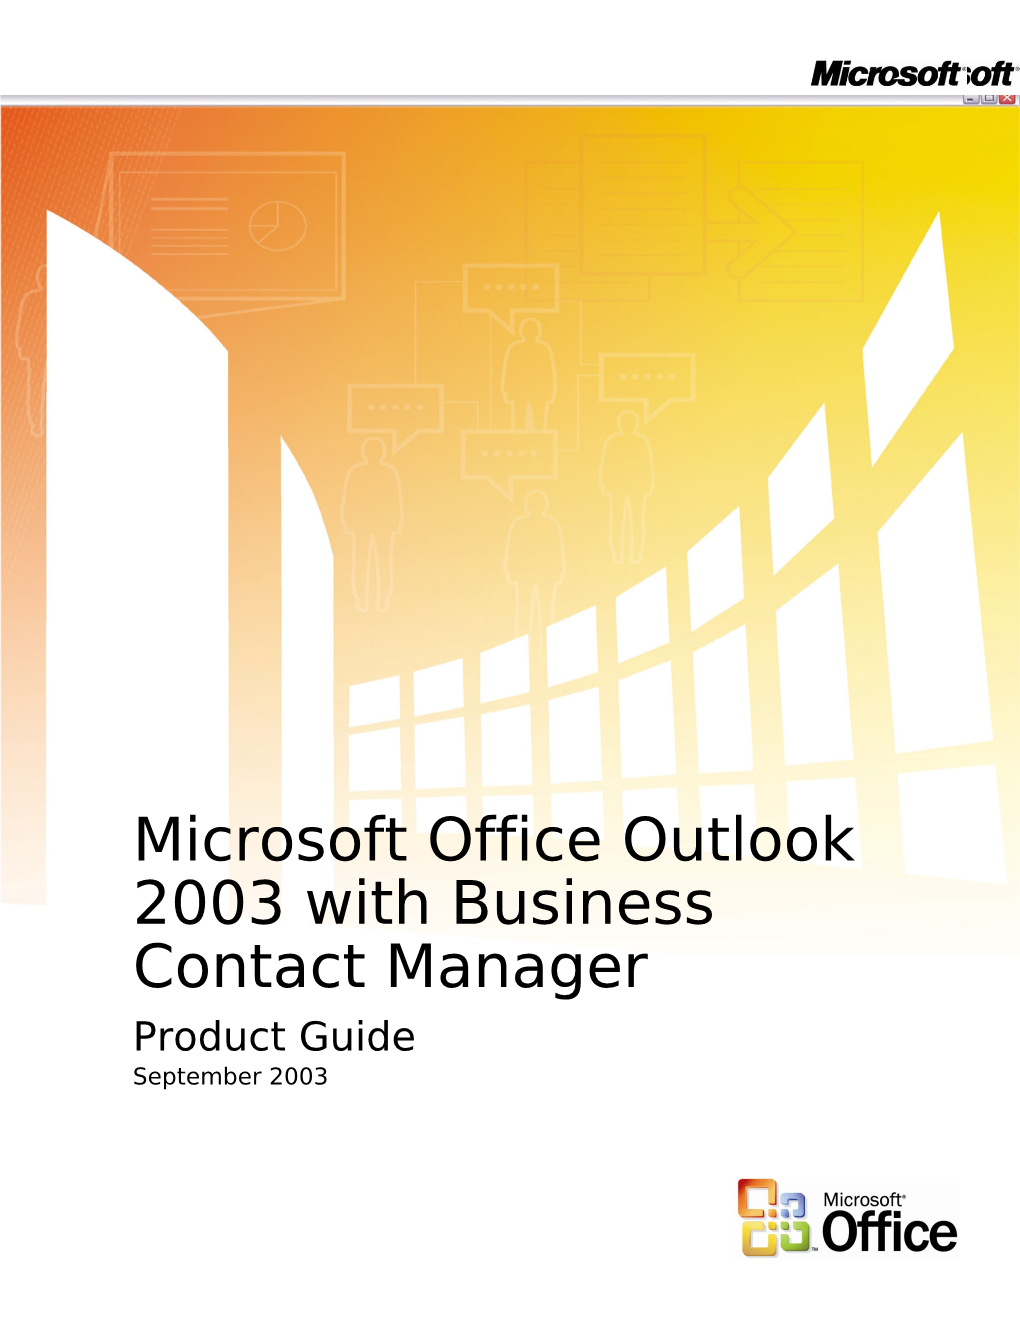 Microsoft Office Outlook 2003 with Business Contact Manager